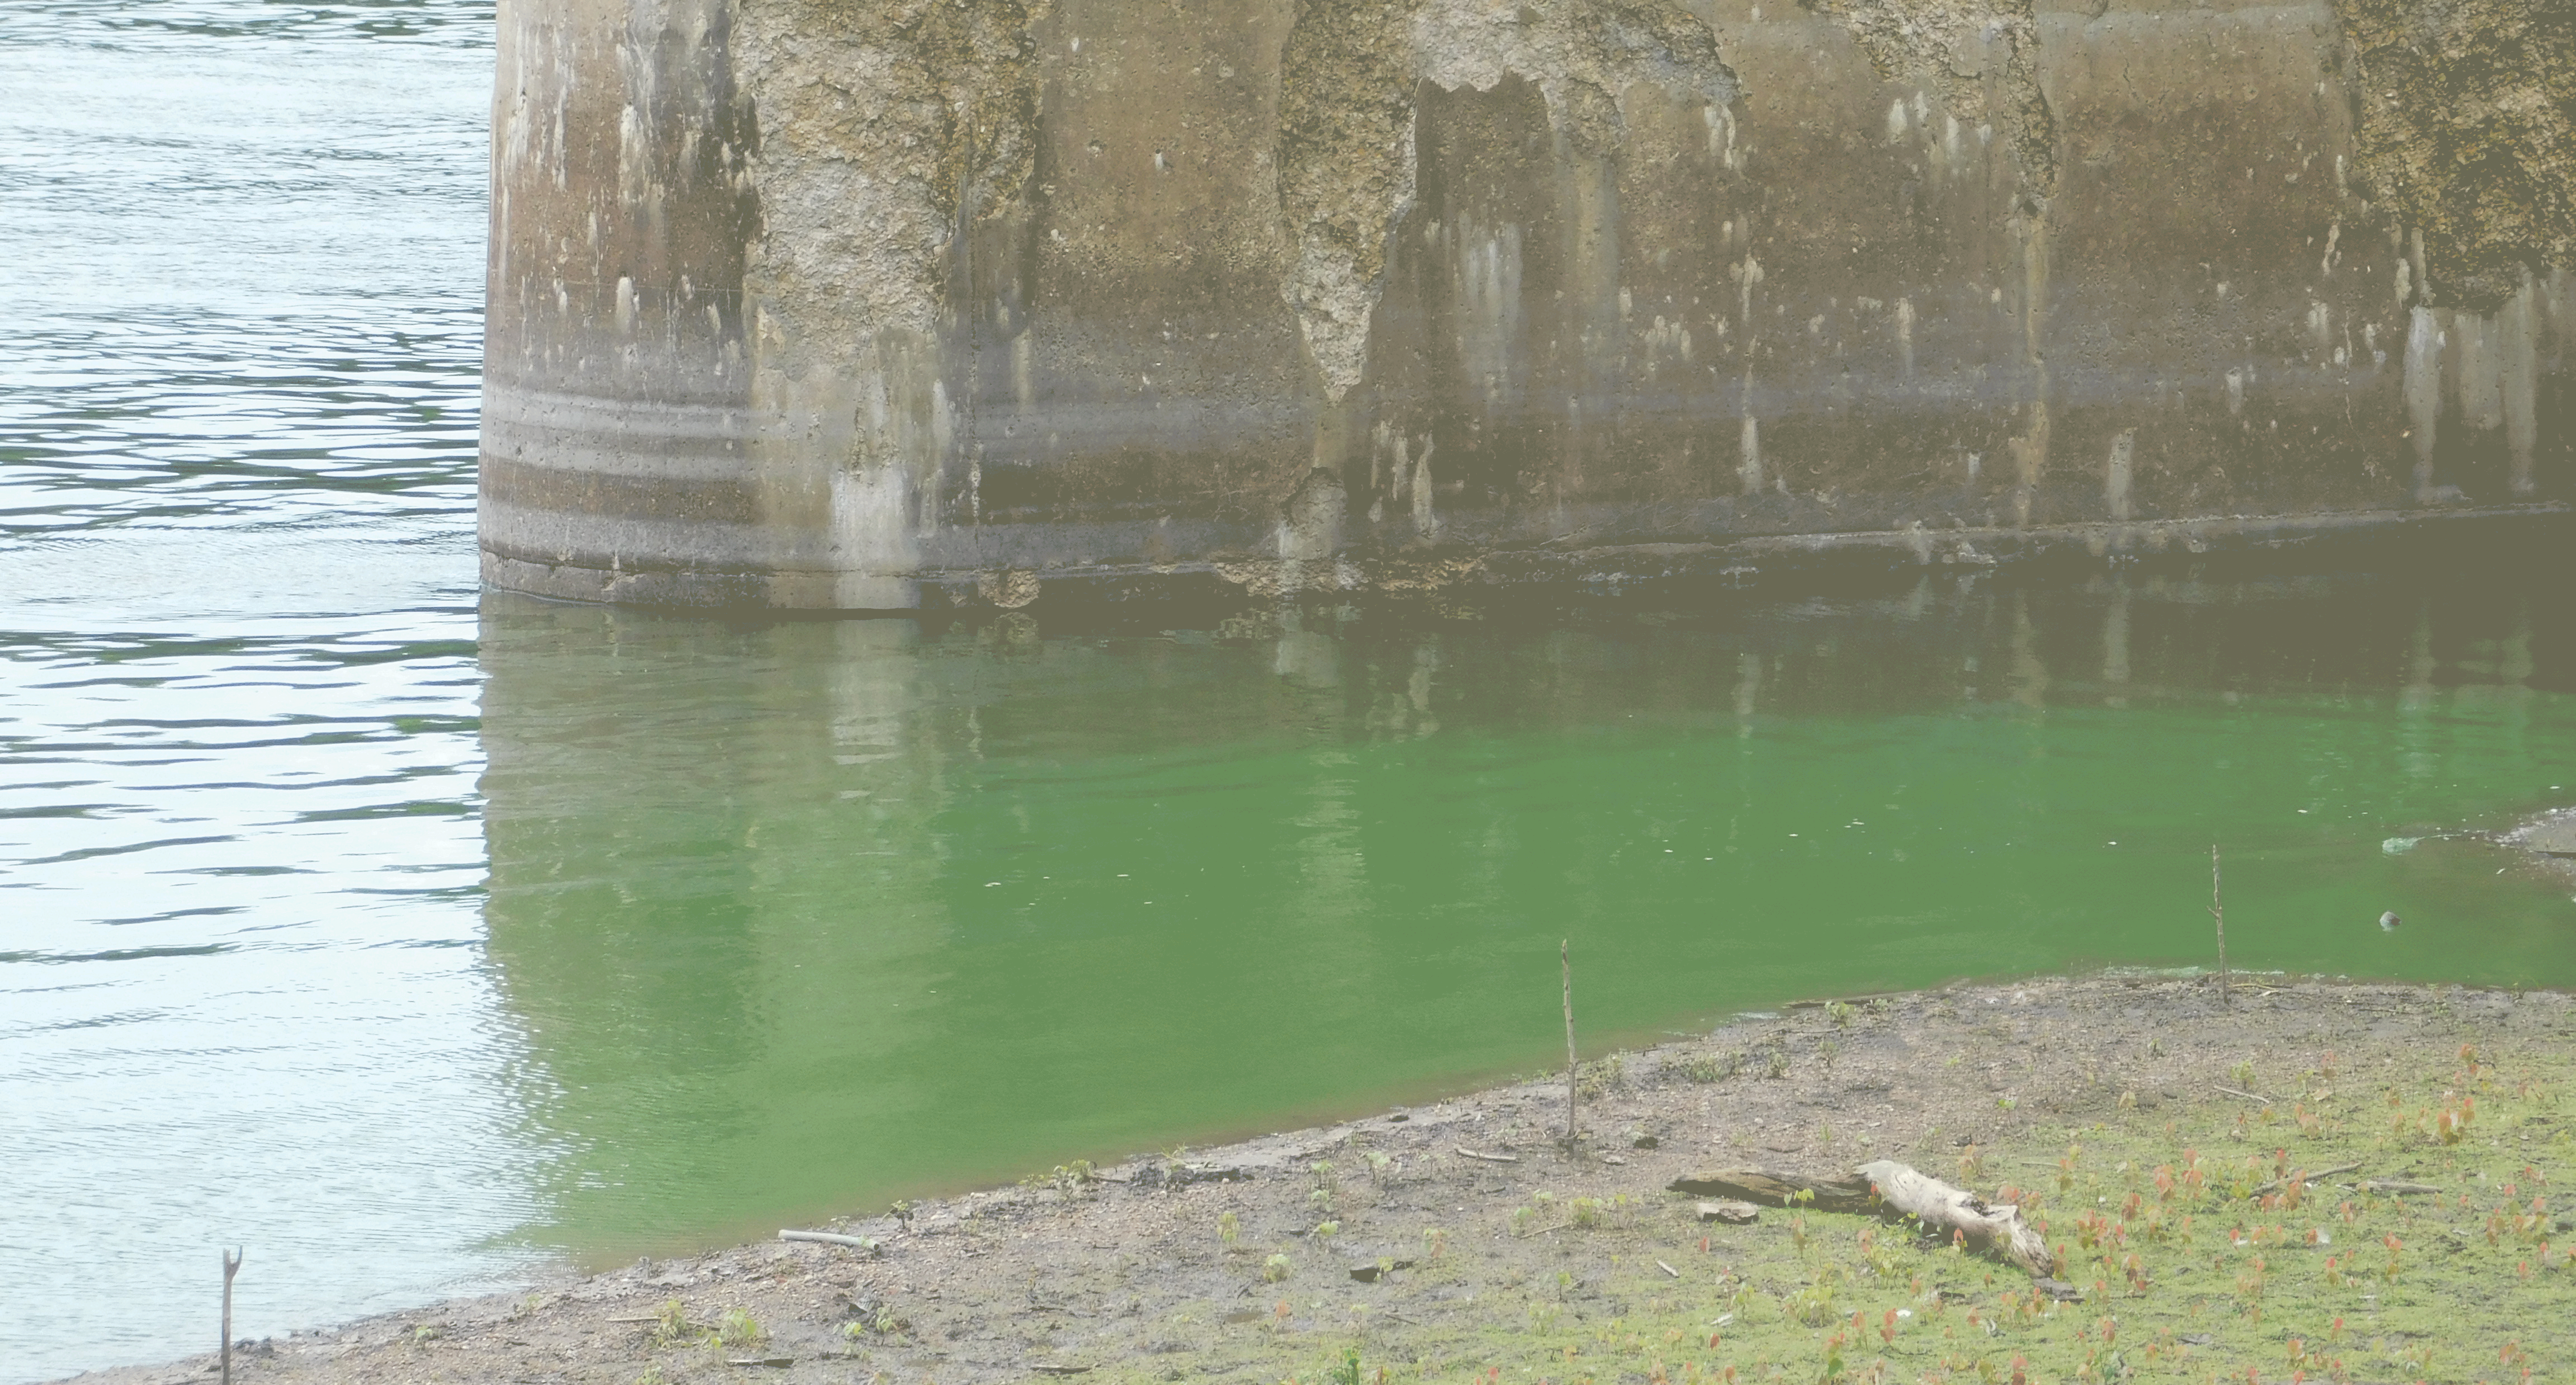 Bright green algal bloom visible in the Illinois River.